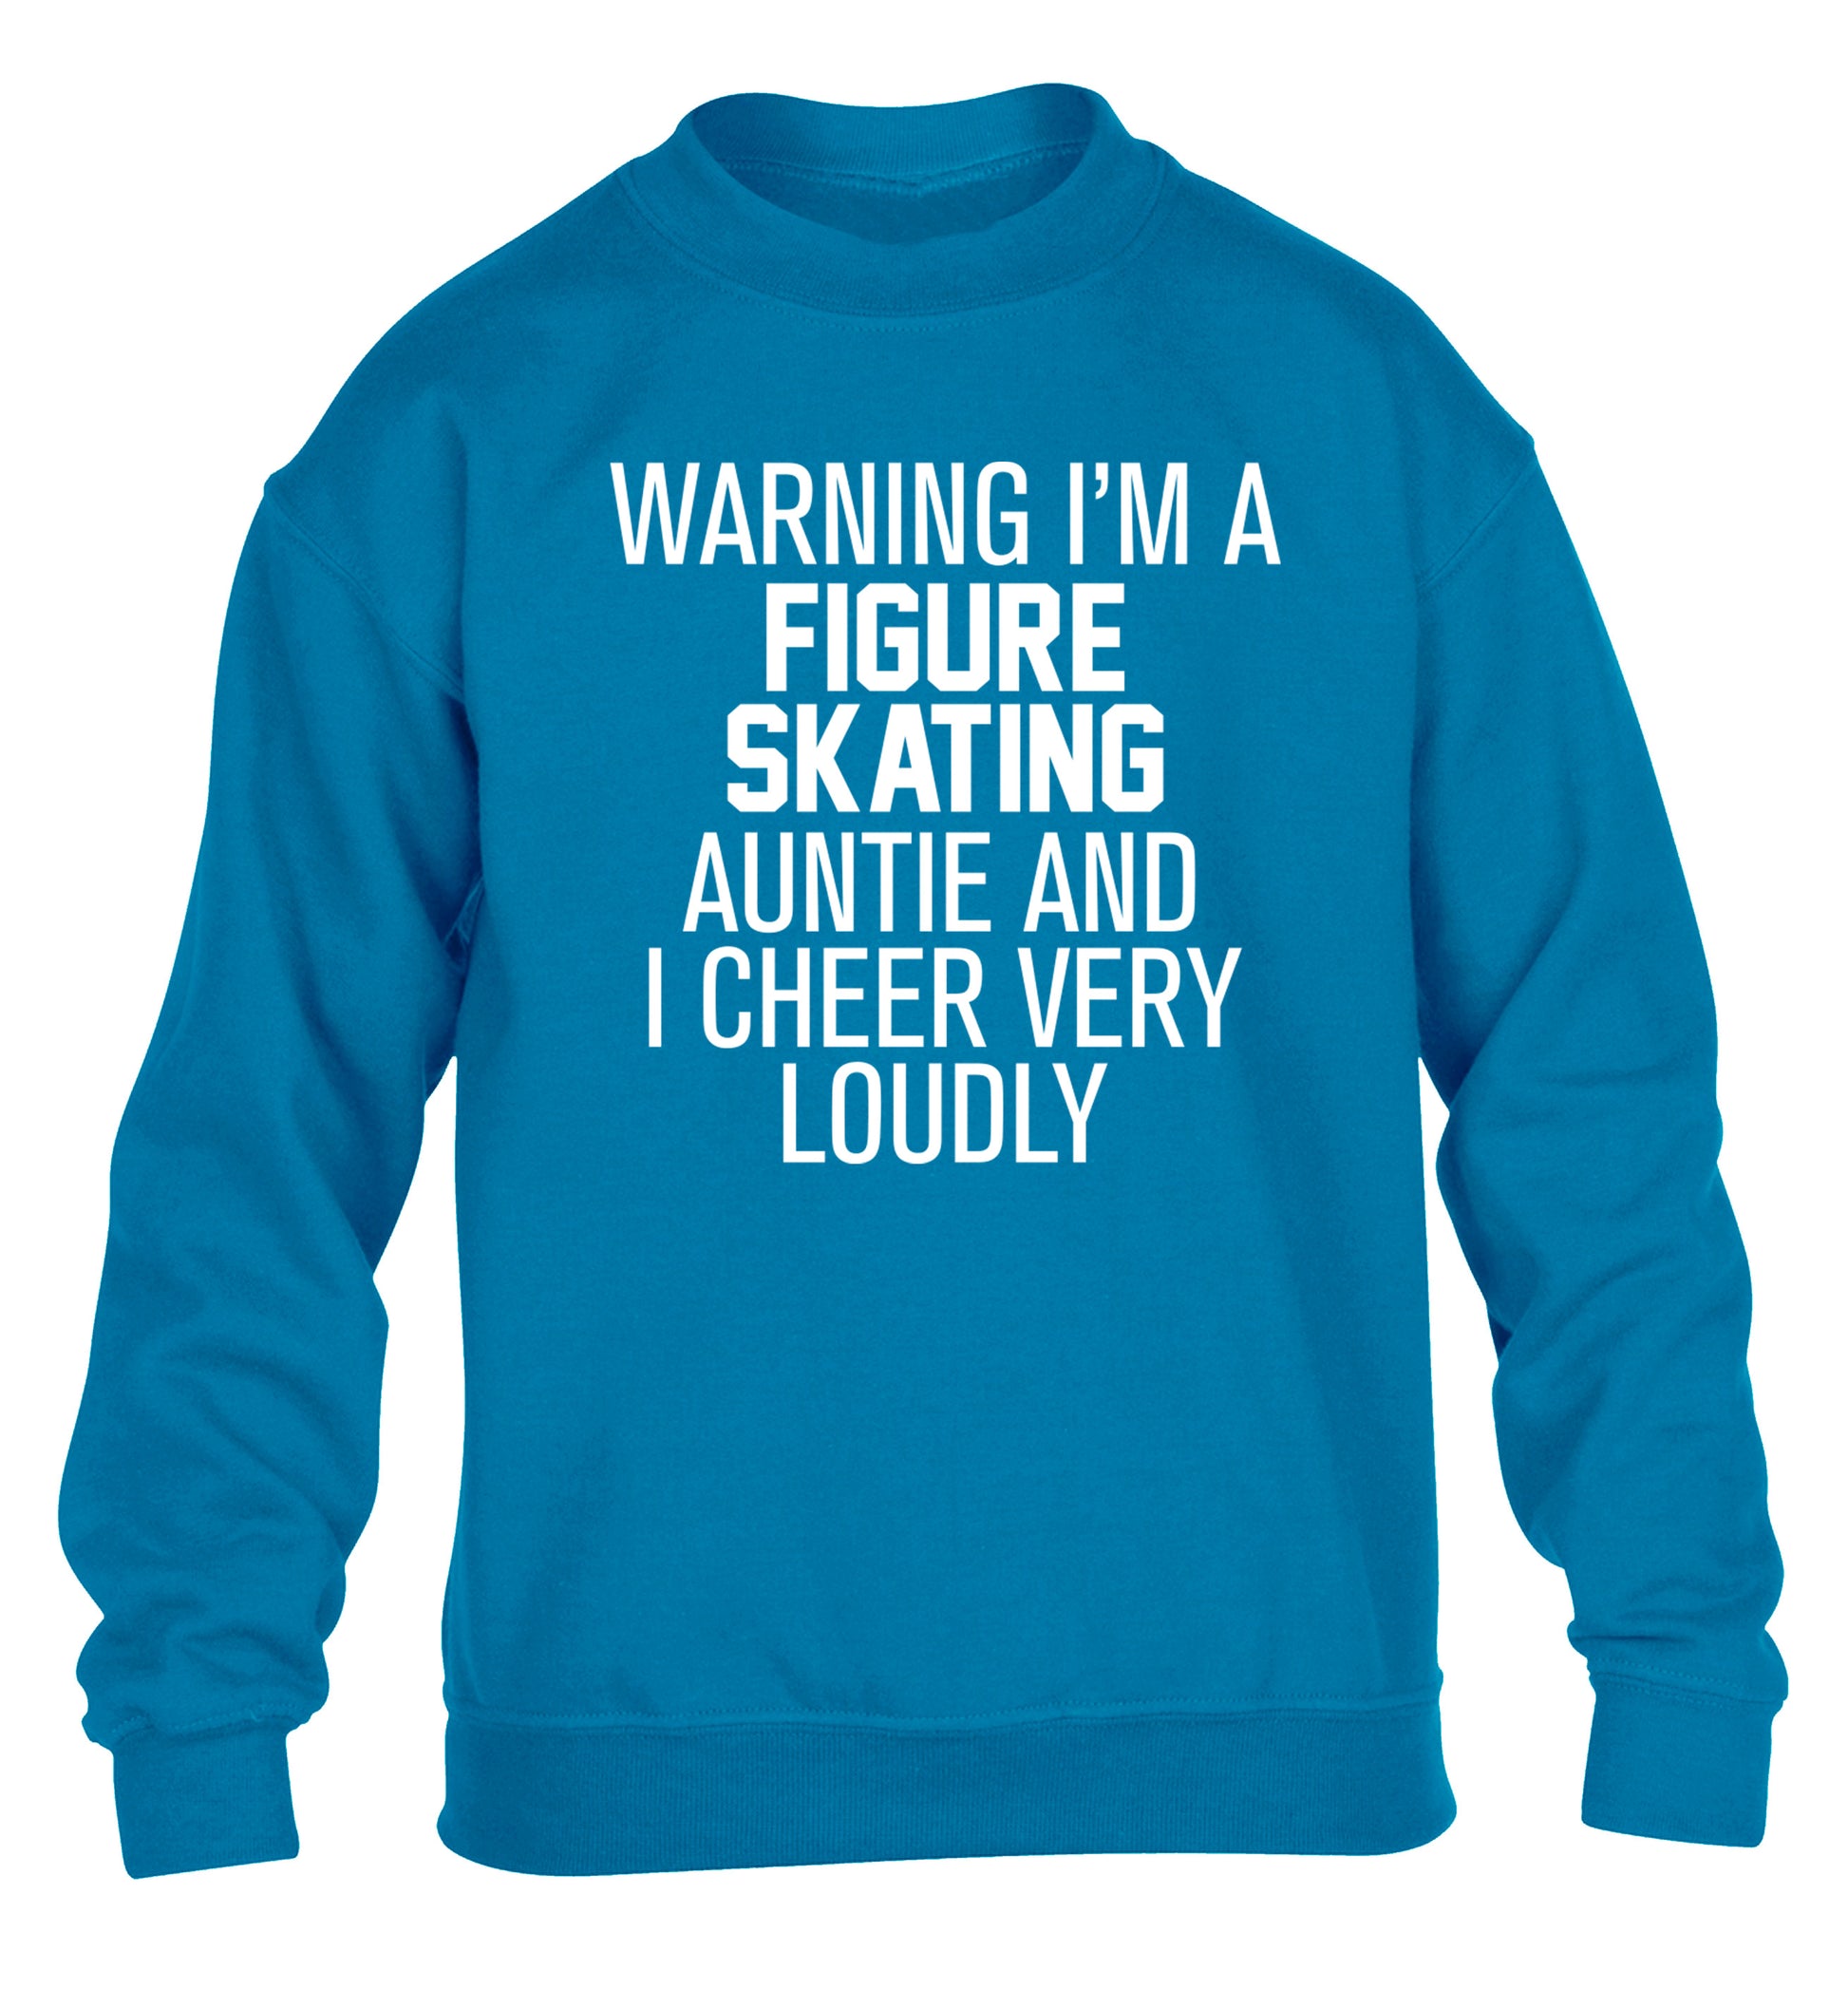 Warning I'm a figure skating auntie and I cheer very loudly children's blue sweater 12-14 Years